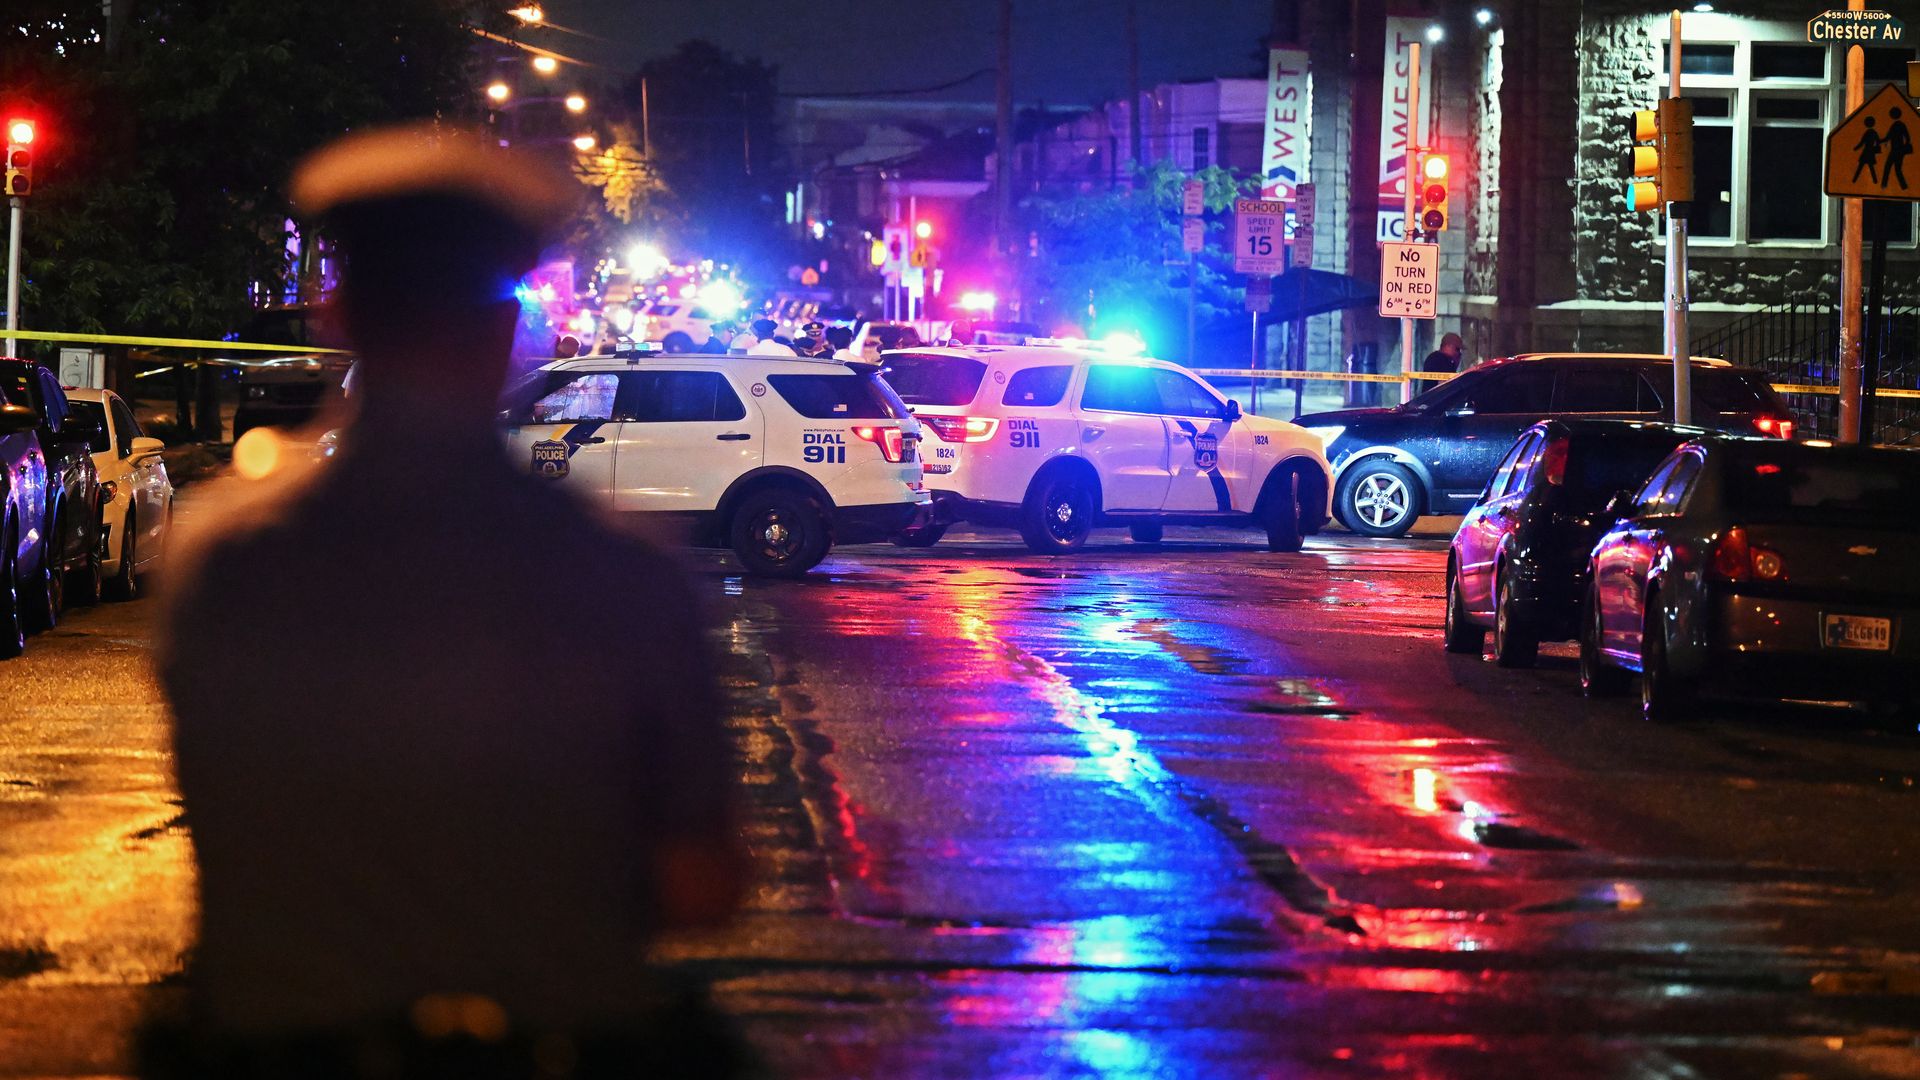 Police at the scene of a shooting that killed five people and injured two more in Philadelphia on July 3.